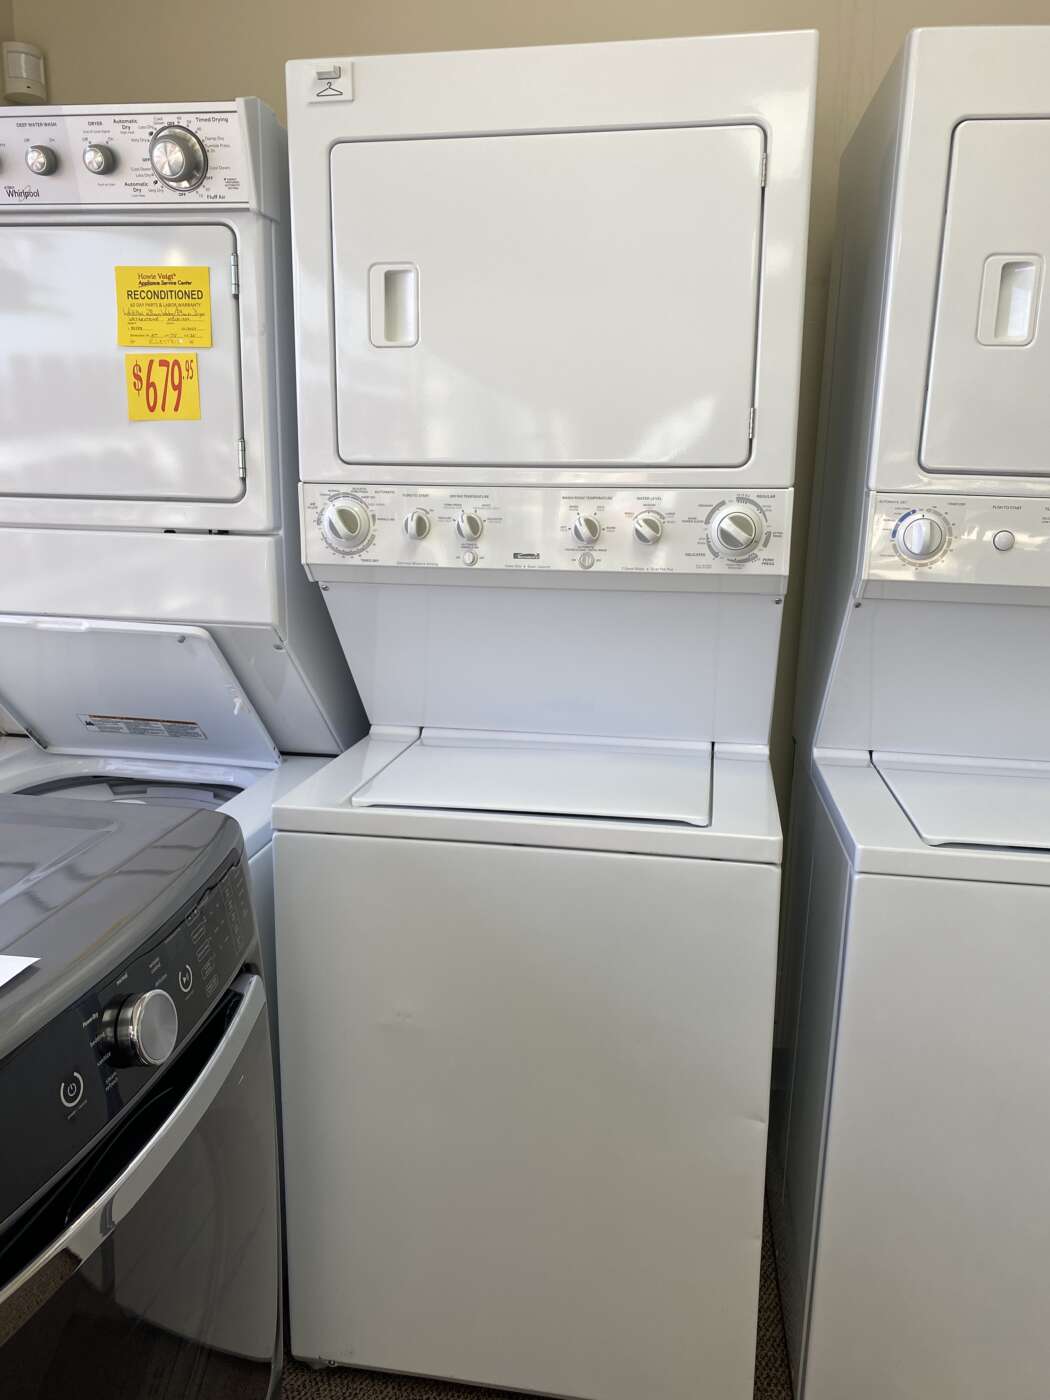 Reconditioned KENMORE 2.7 Cu. Ft. Top-Load Washer & 5.7 Cu. Ft. Electric Dryer – White